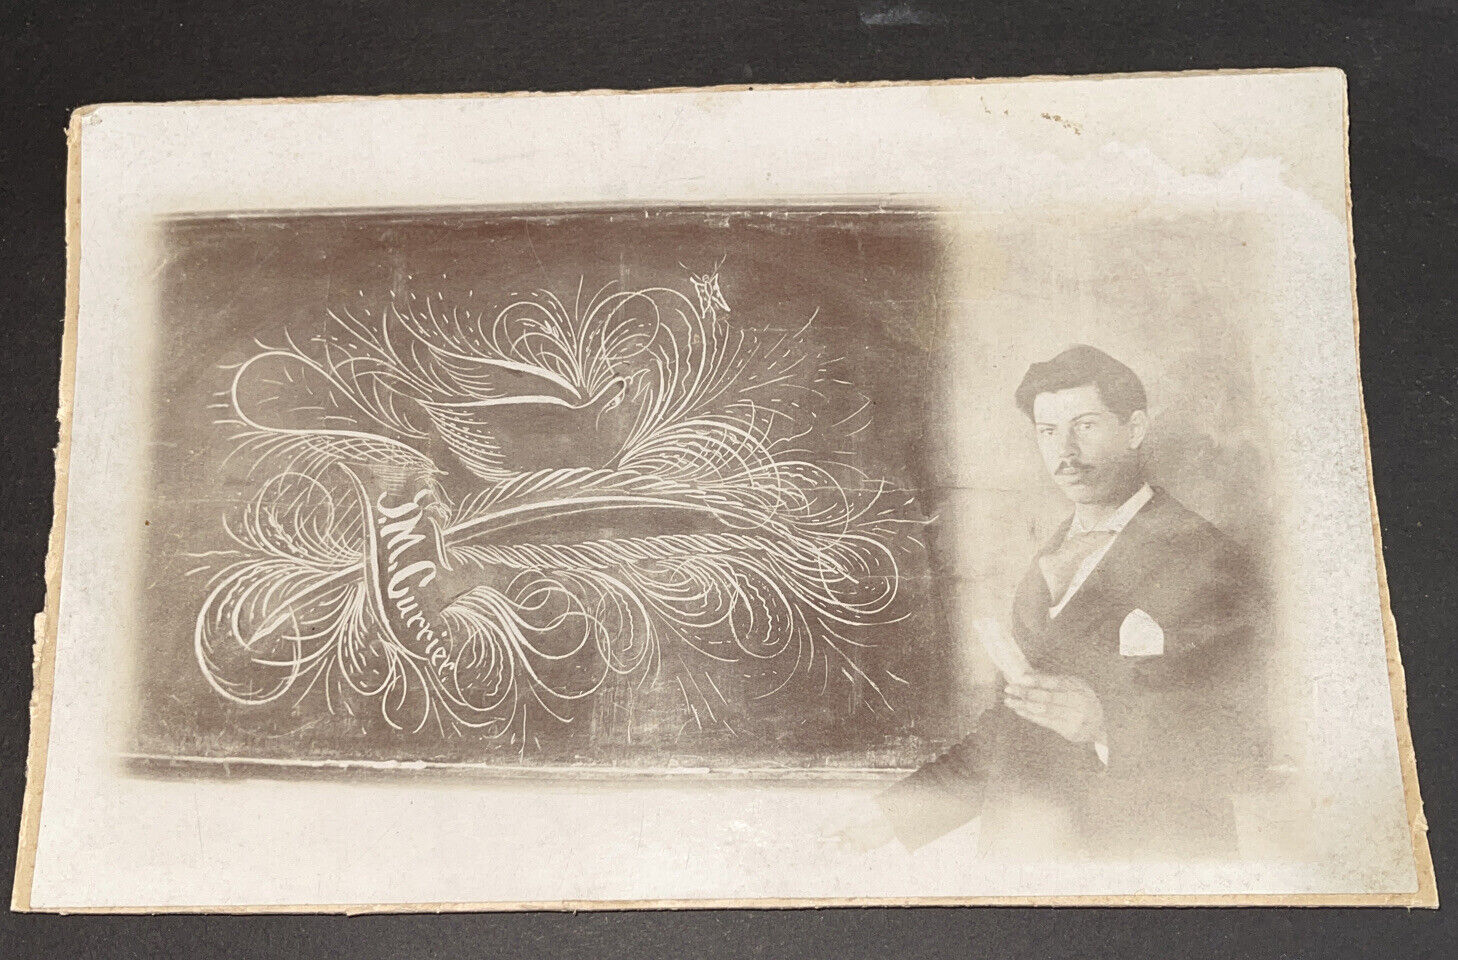 ANTIQUE Cabinet CARD PHOTO Occupational Calligraphy Artist J.M. Currier C. 1880.